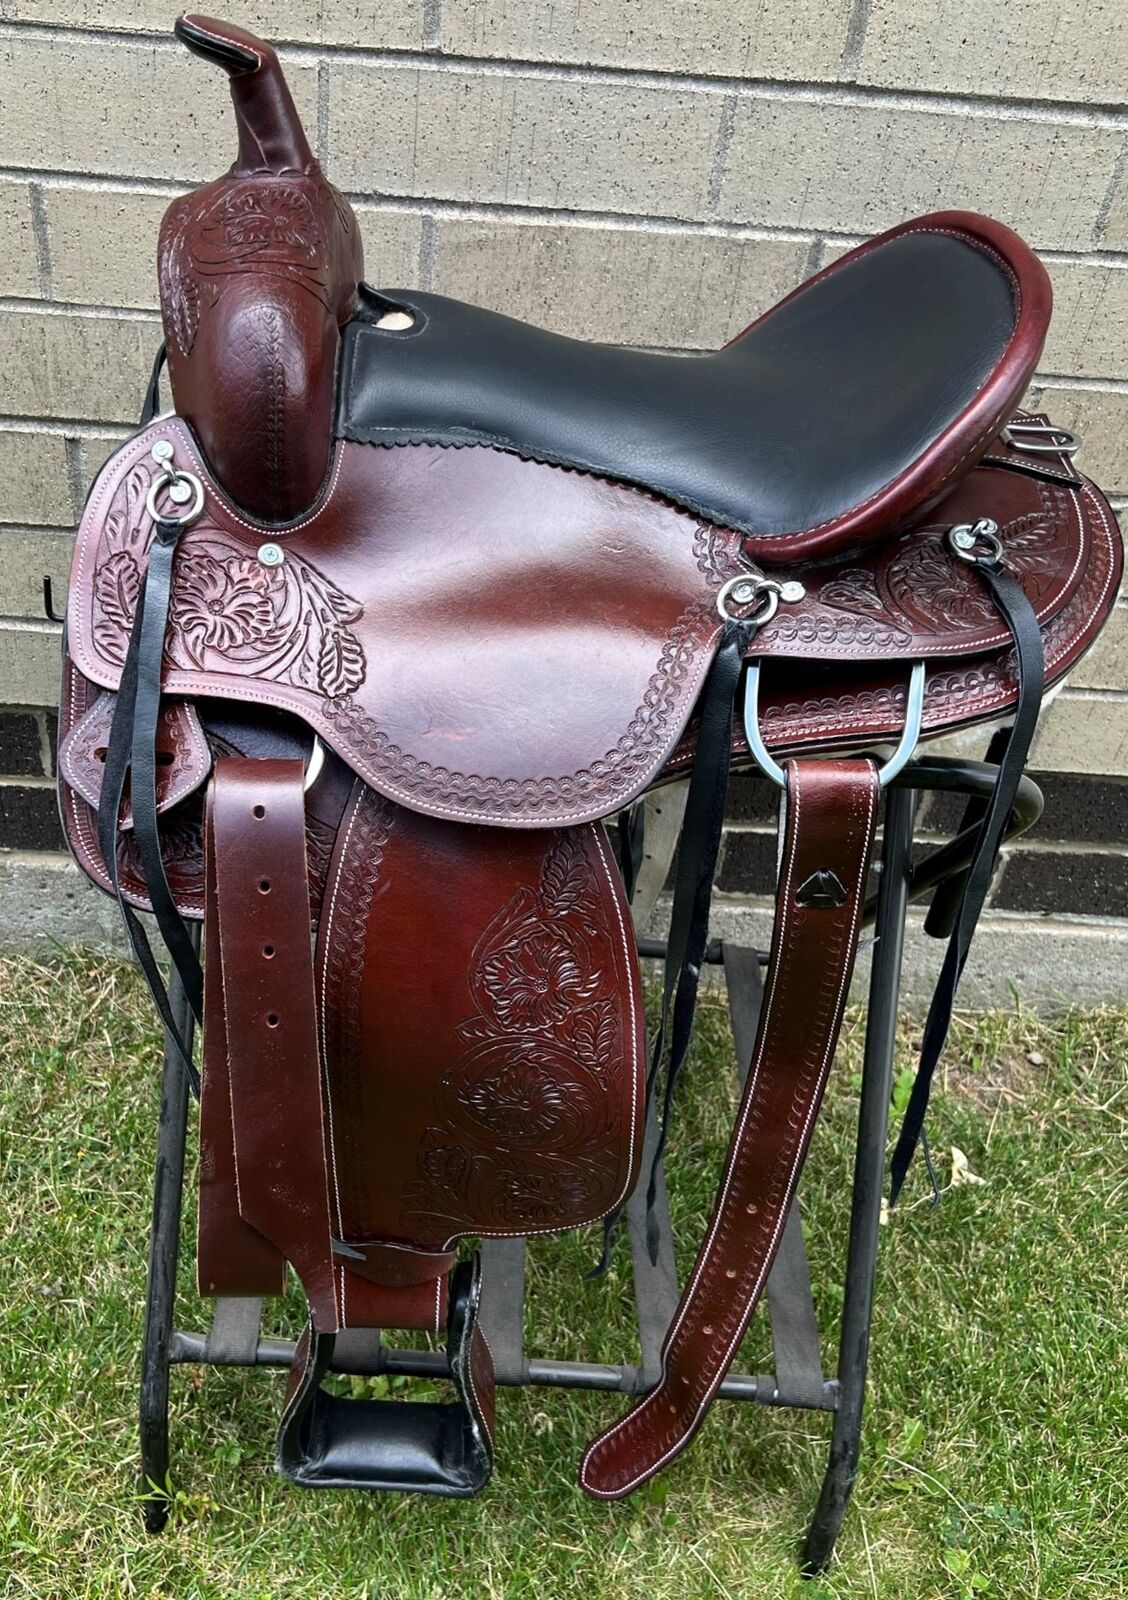 HORSE SADDLE WESTERN USED TRAIL ROUND SKIRT BROWN TOOLED TACK 15 16 17 18 in